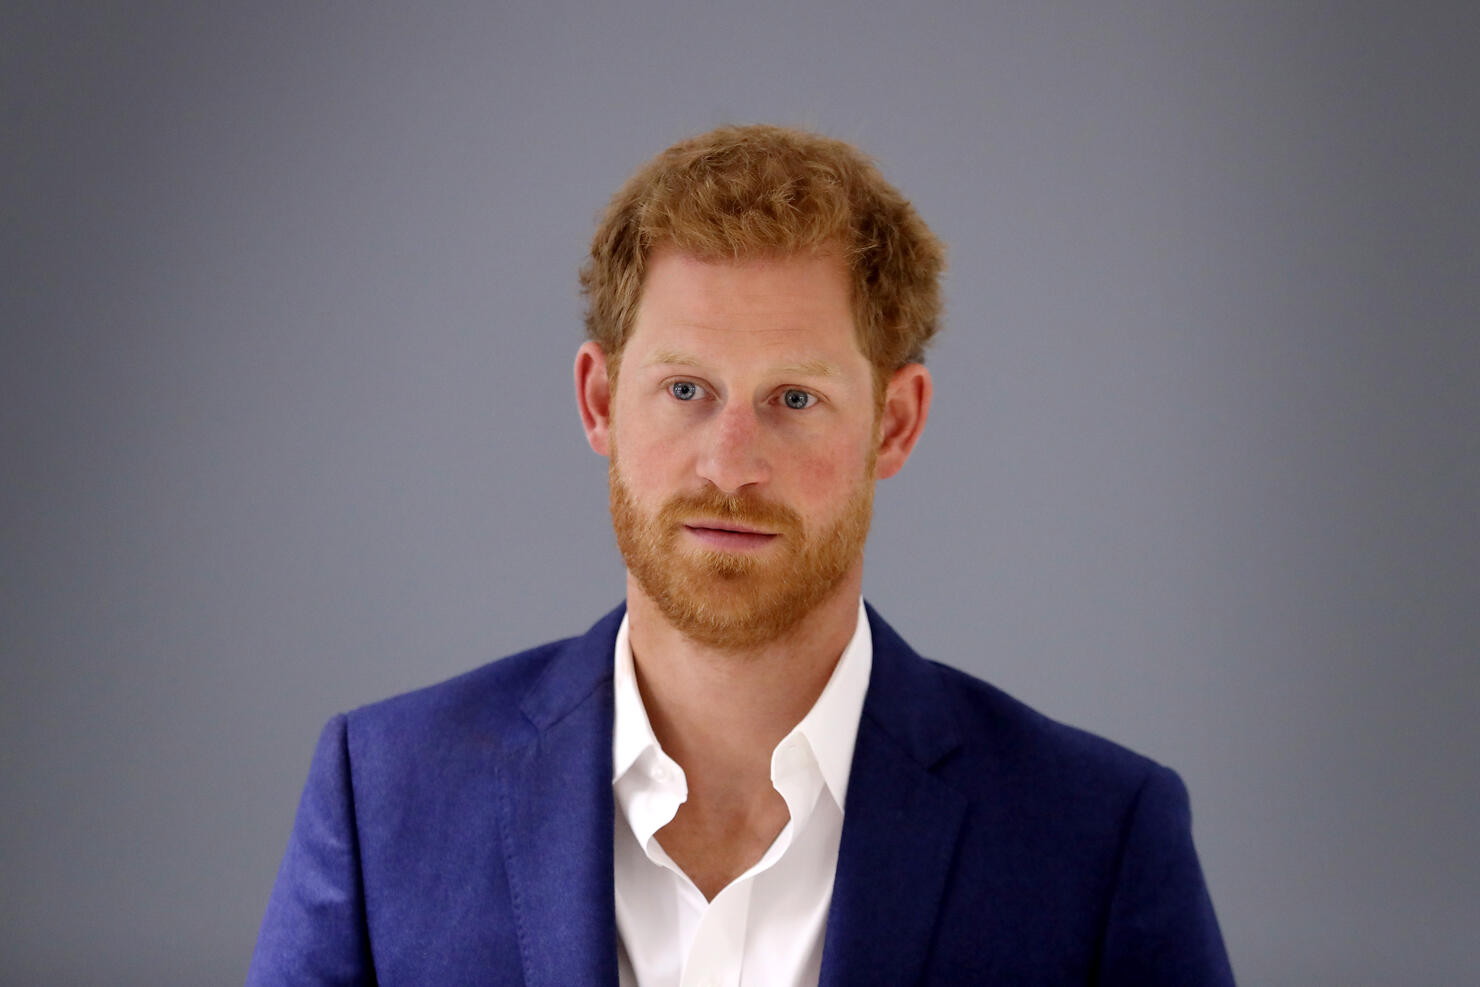 Prince Harry Visits Manchester